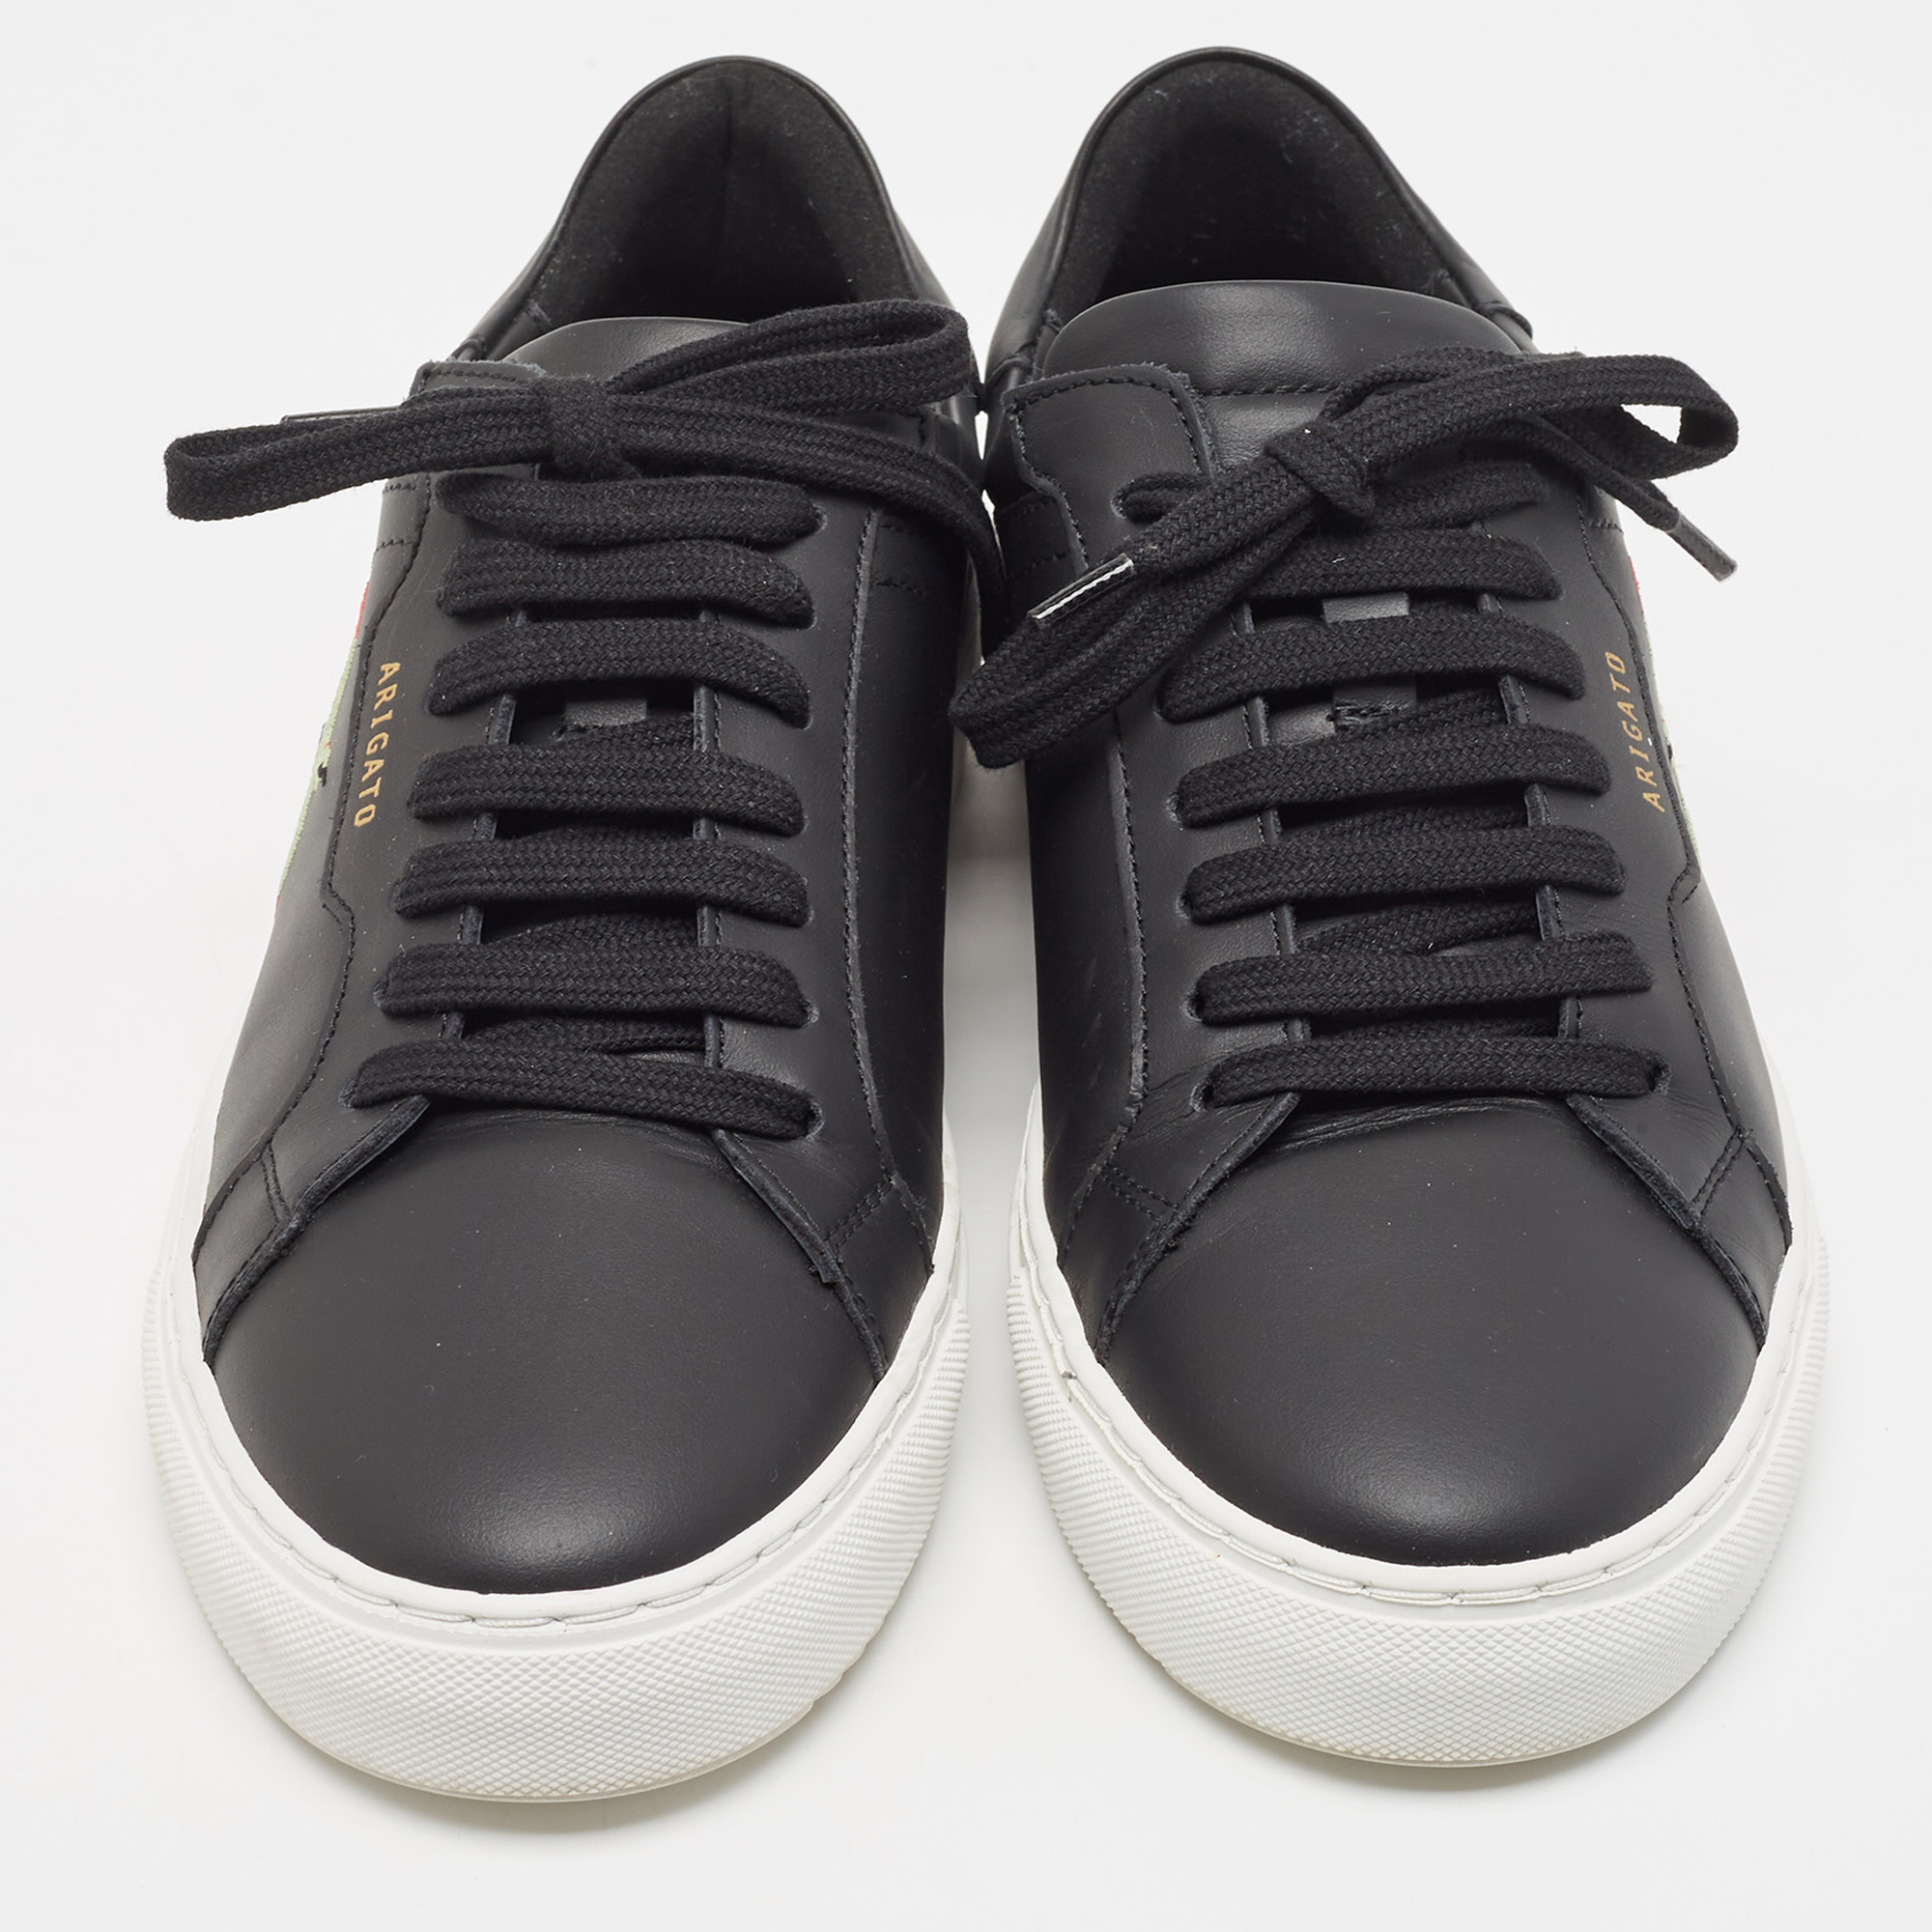 Axel Arigato Black Leather Low Top Sneakers Size 40